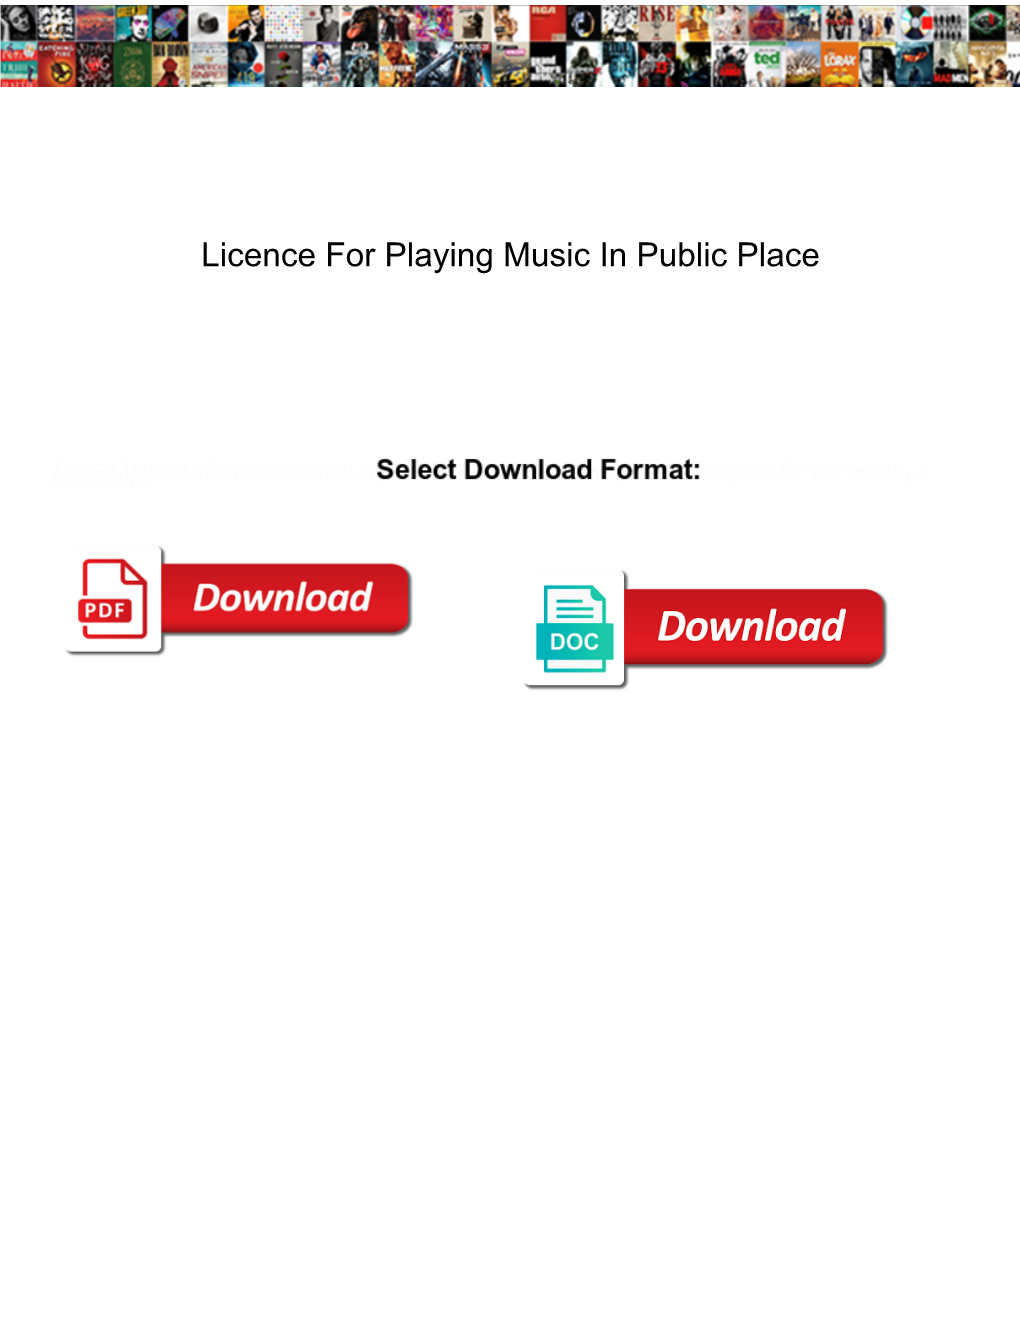 Licence for Playing Music in Public Place